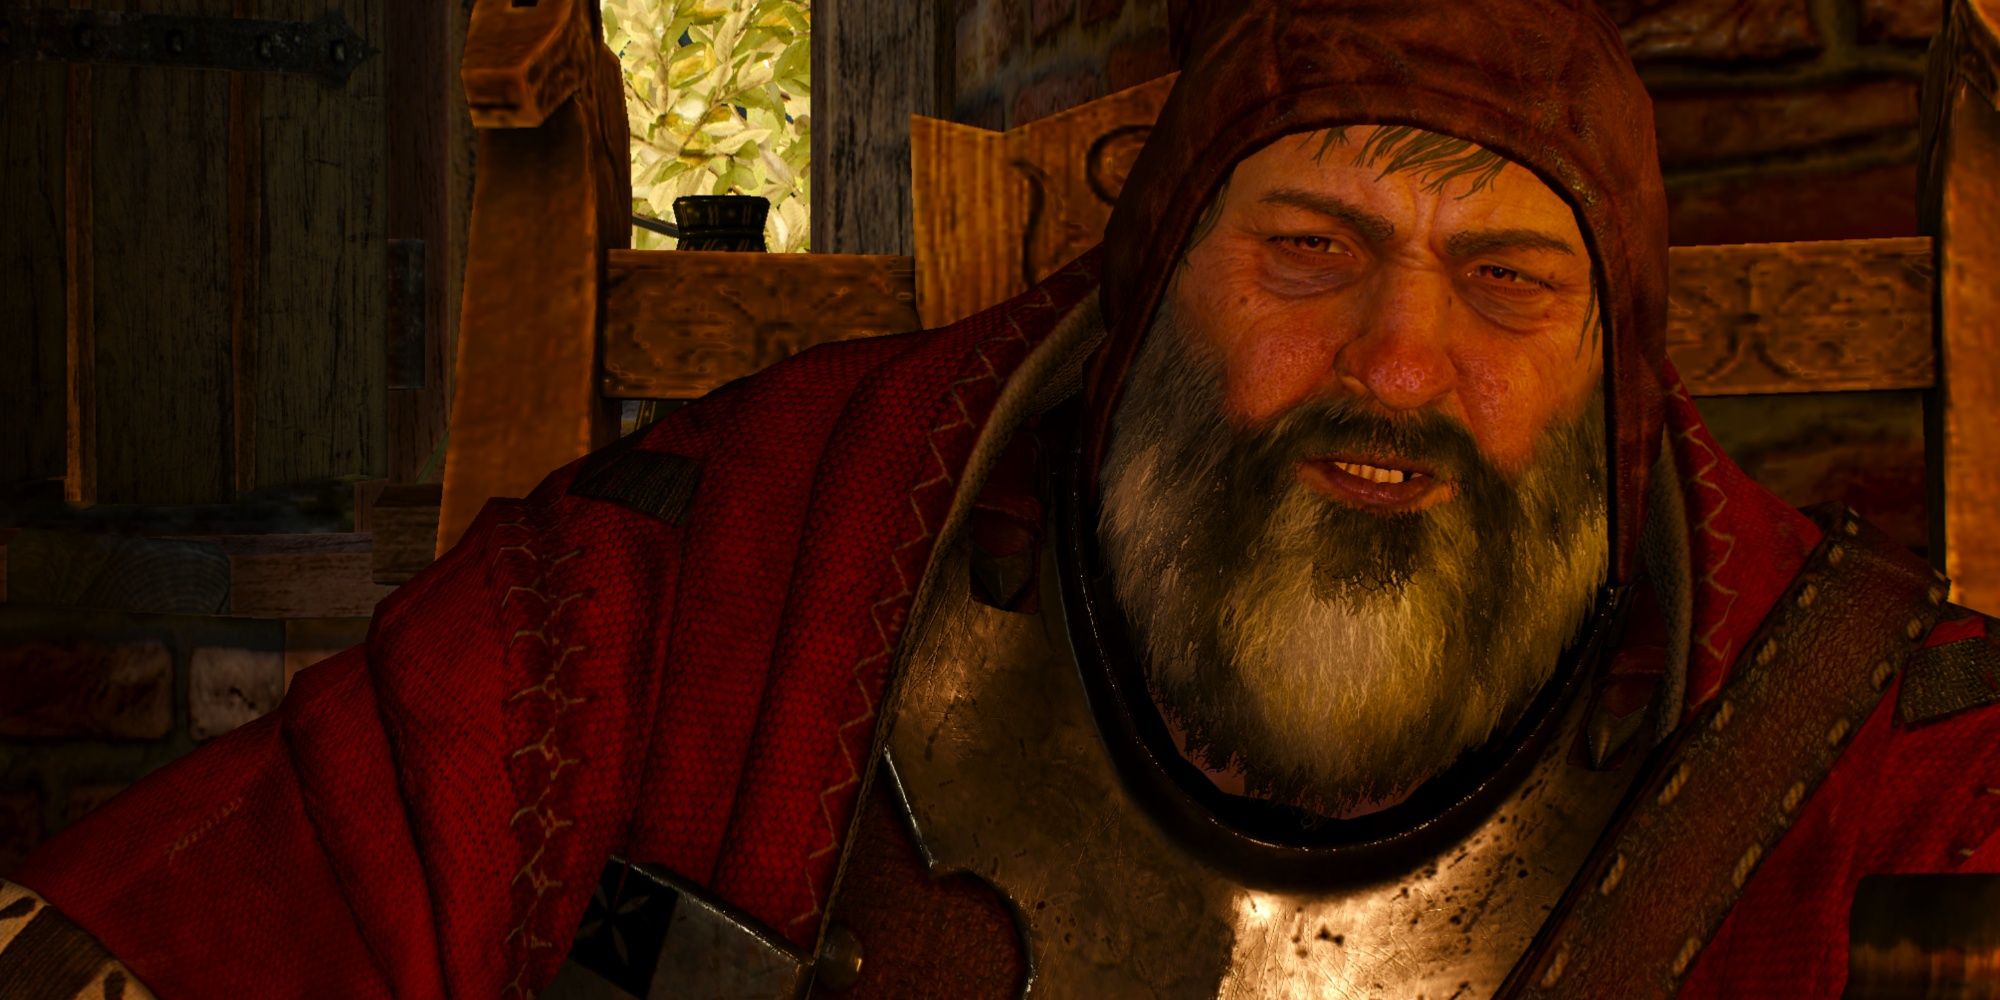 The Bloody Barron From The Witcher 3 quest: Family Matters